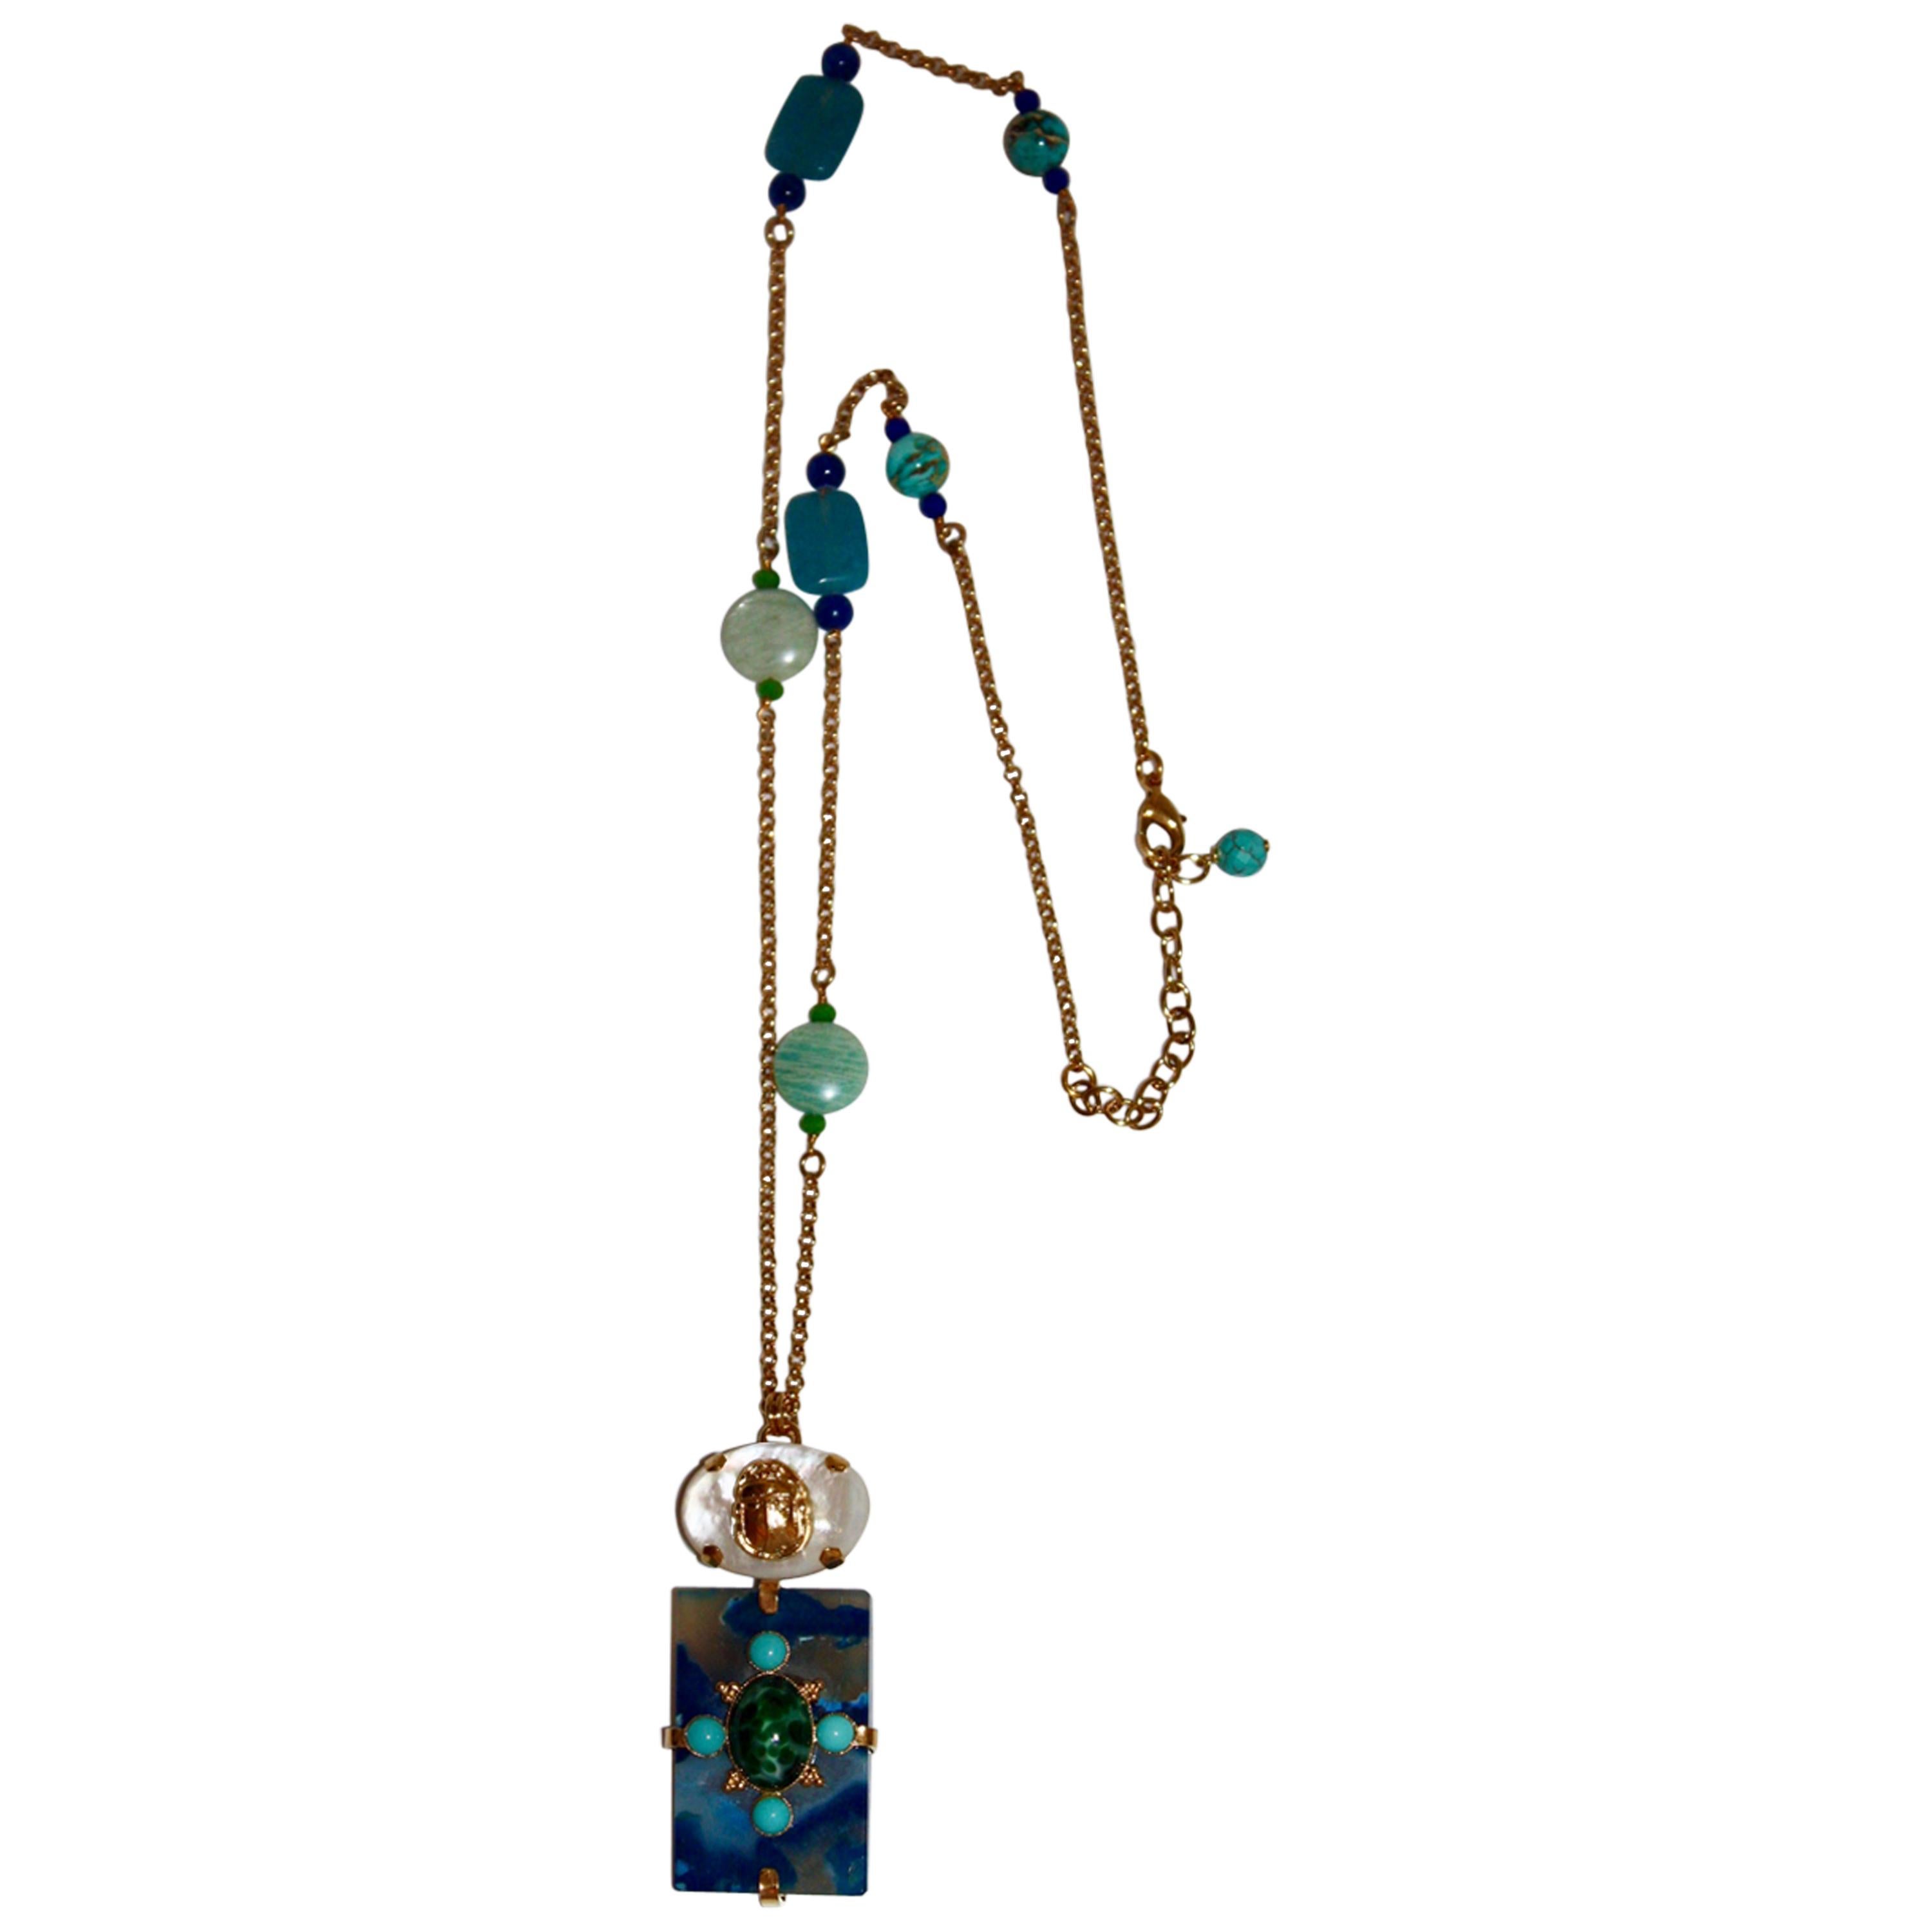 Philippe Ferrandis Turquoise, Lapis, and Mother of Pearl Long Chain Necklace